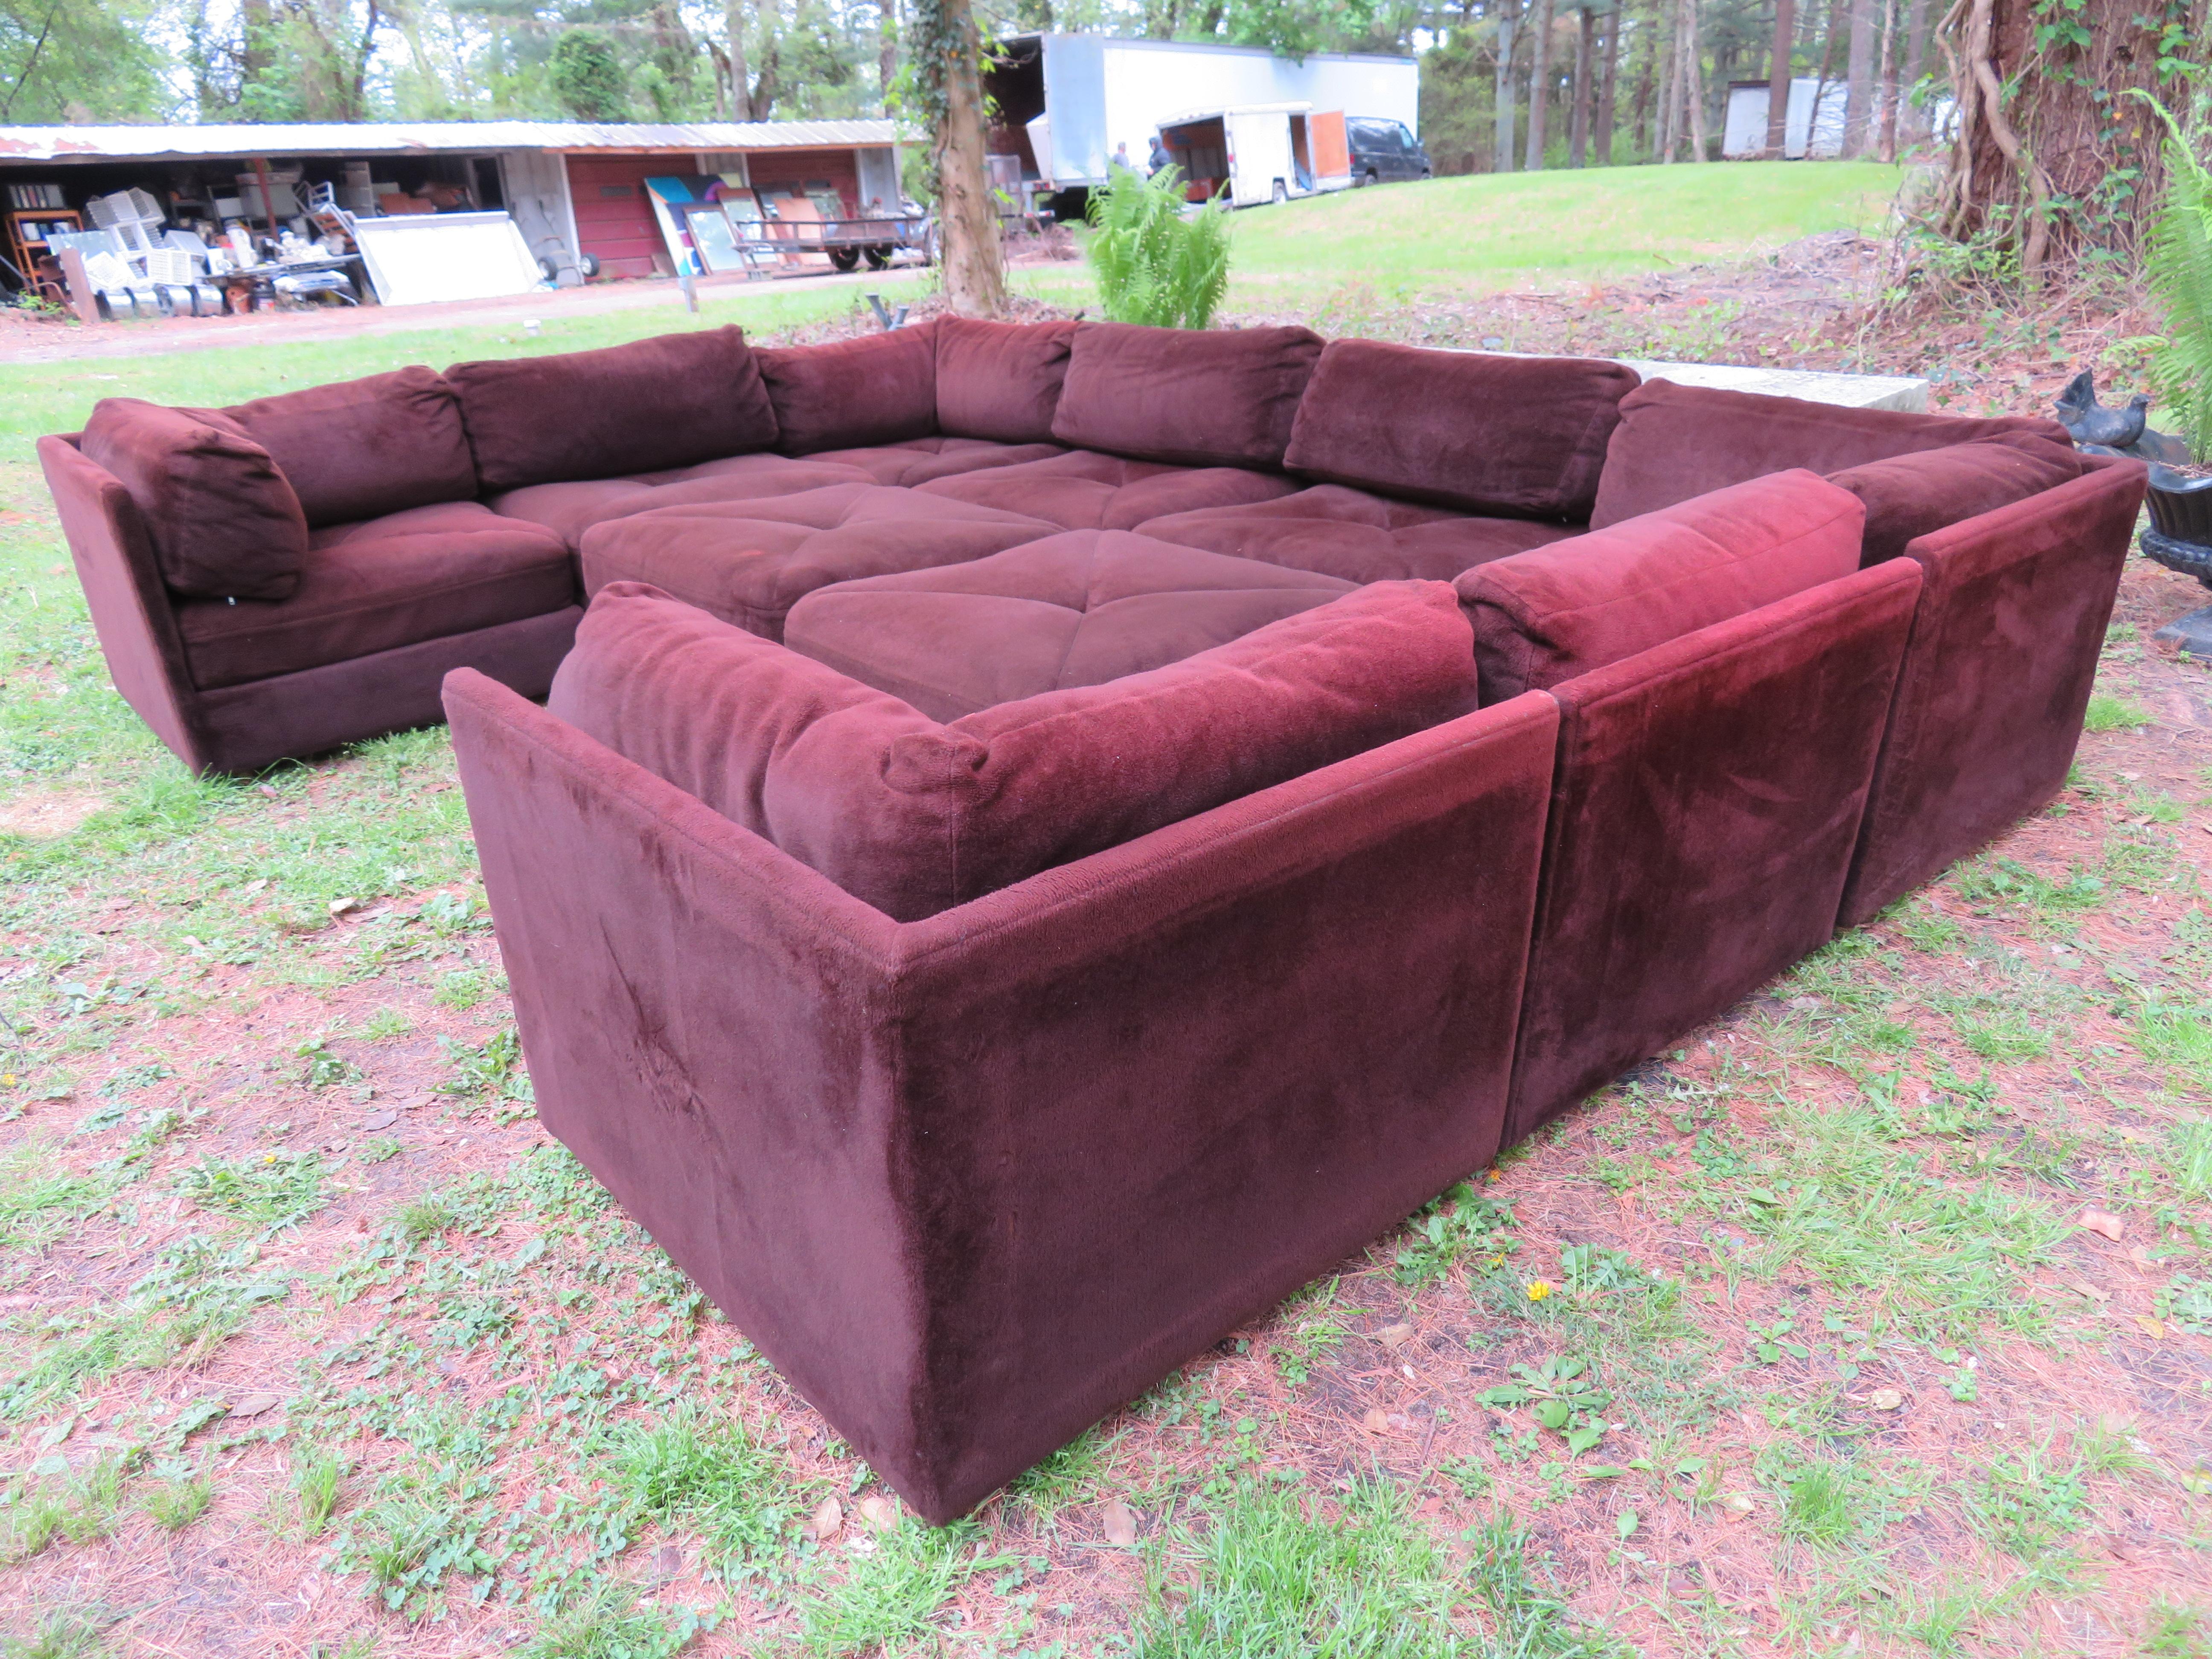 Late 20th Century Huge 10-Piece Milo Baughman Style Sectional Sofa by Selig, Mid-Century Modern